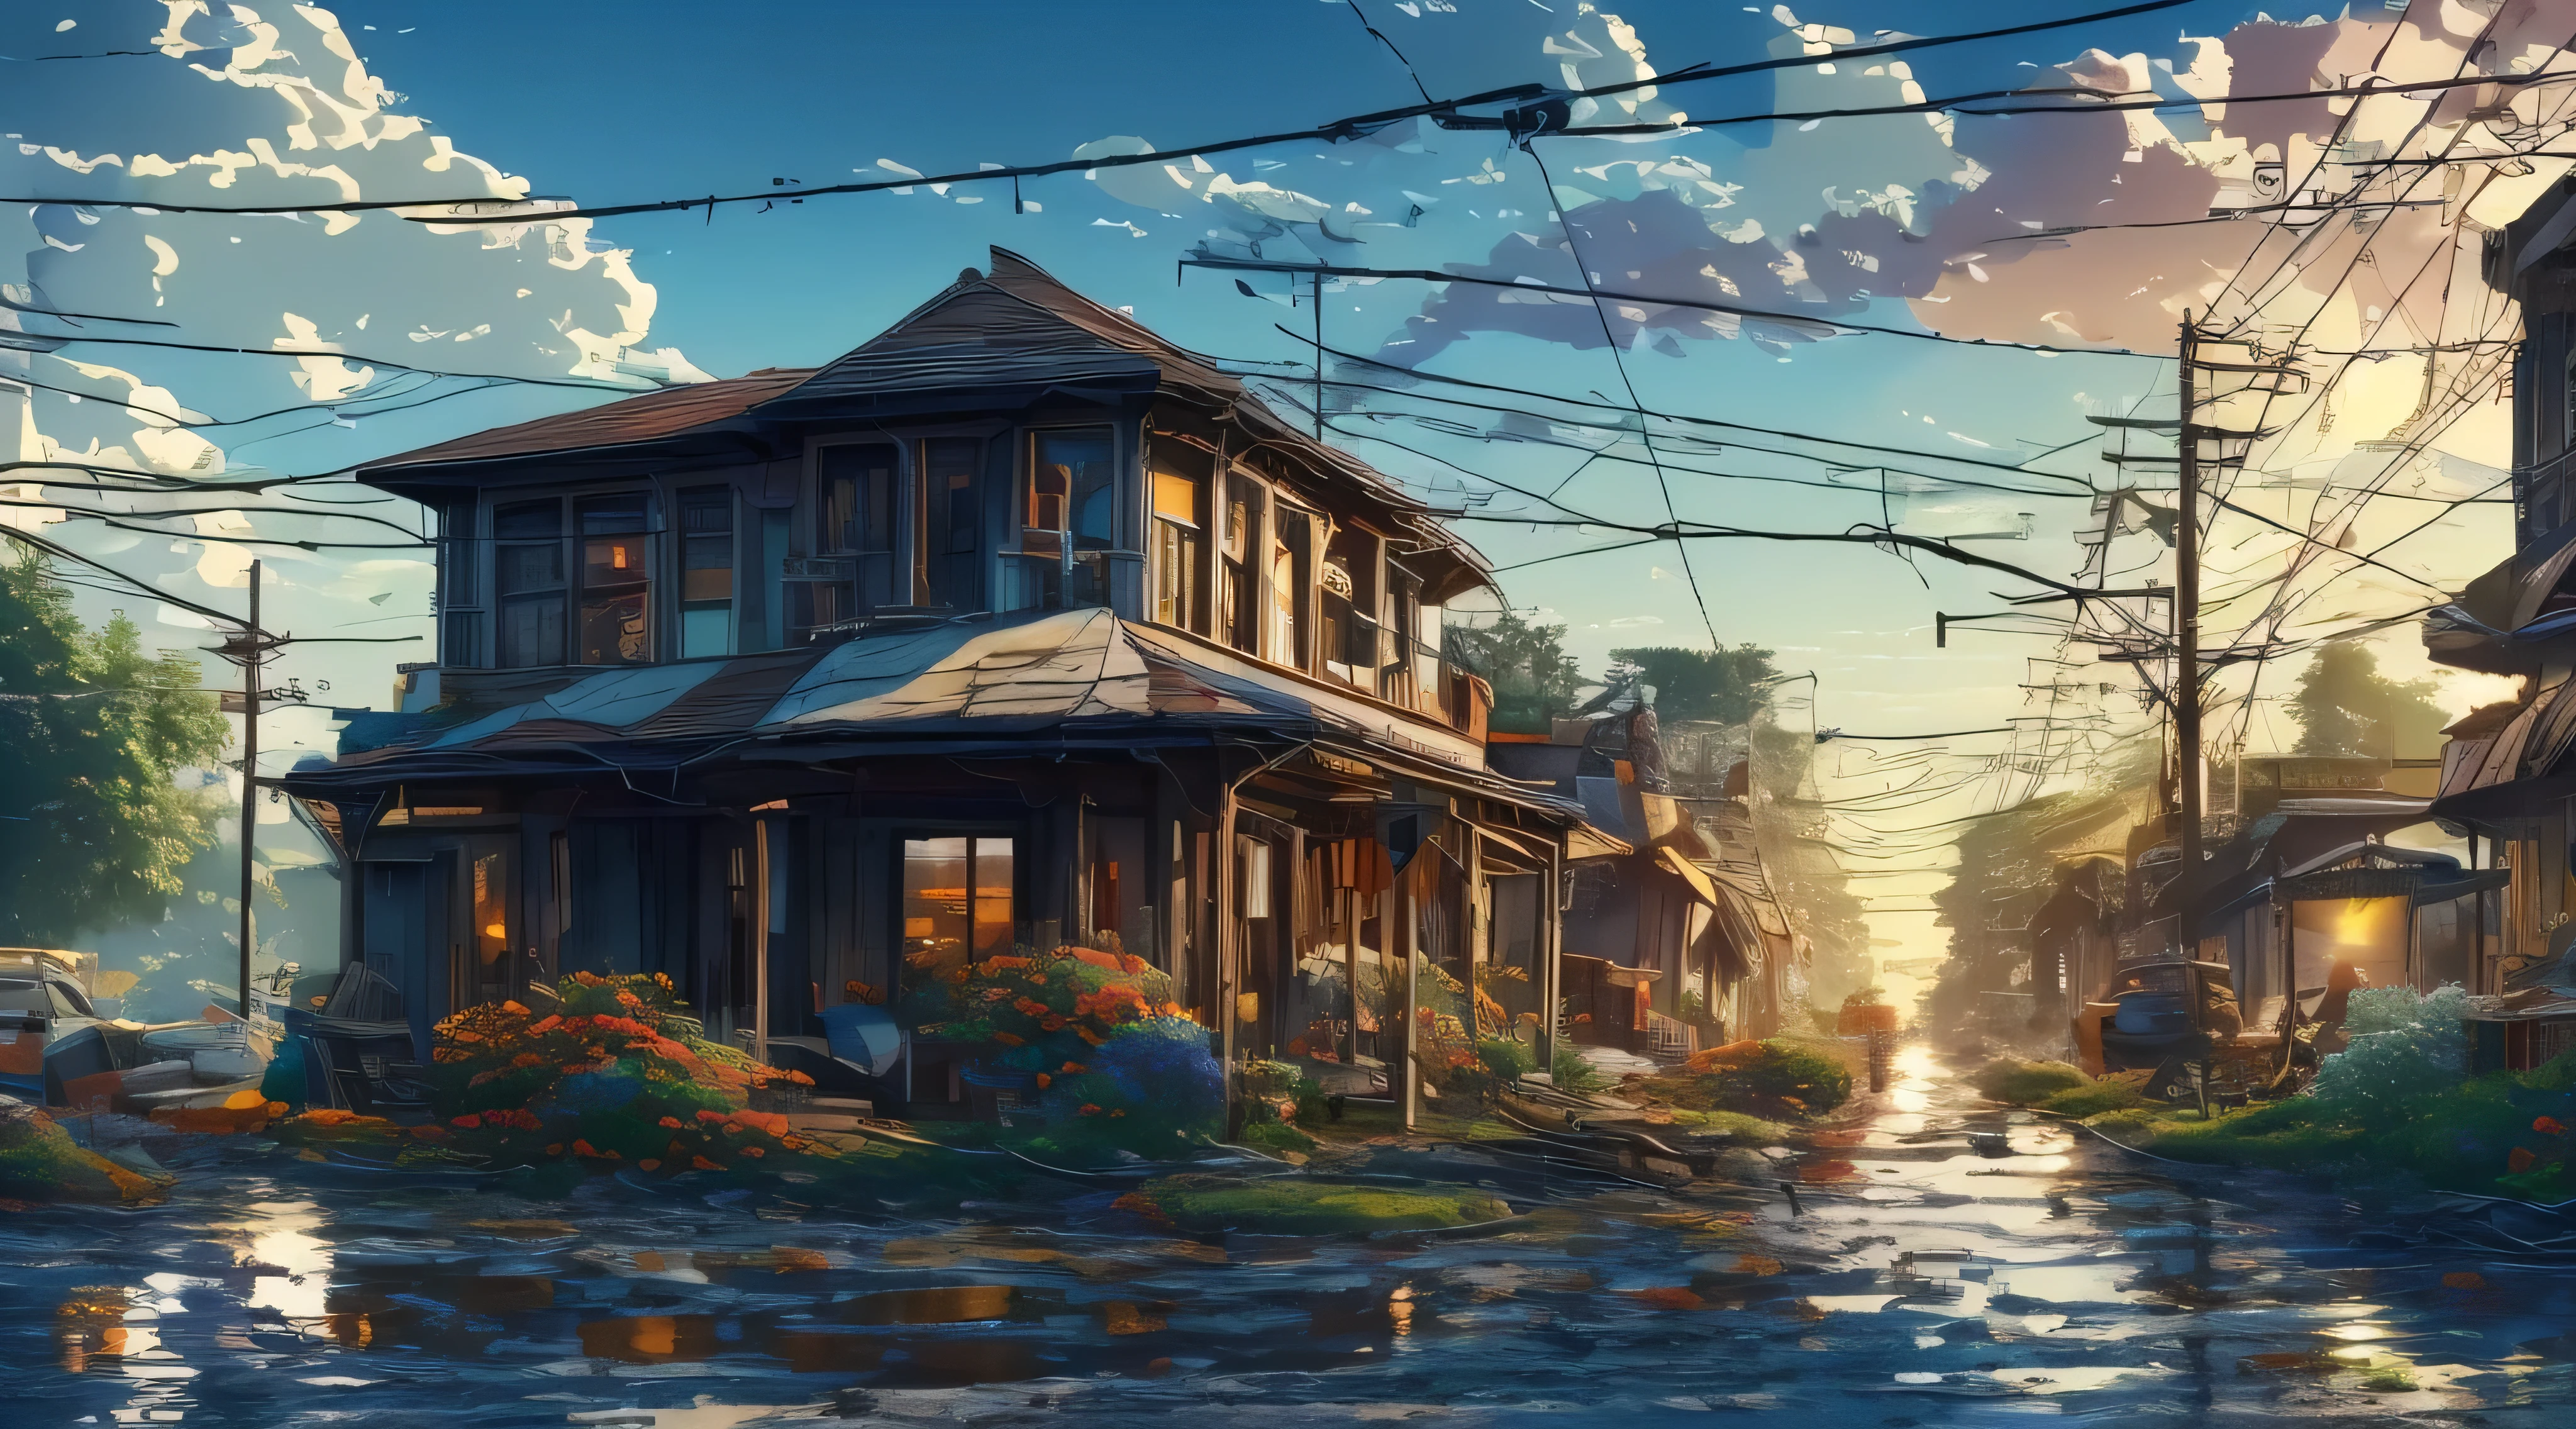 very cozy little place, hyper realism, (anime Makoto Shinkai:0.4), old shabby house in city street, home wiring, outdoors, sky, cloud, day, scenery, tree, blue sky, building, sign, wires, railing, wide shot, utility pole, town, wilderness, flowers, a lot of utensils lying around in a mess